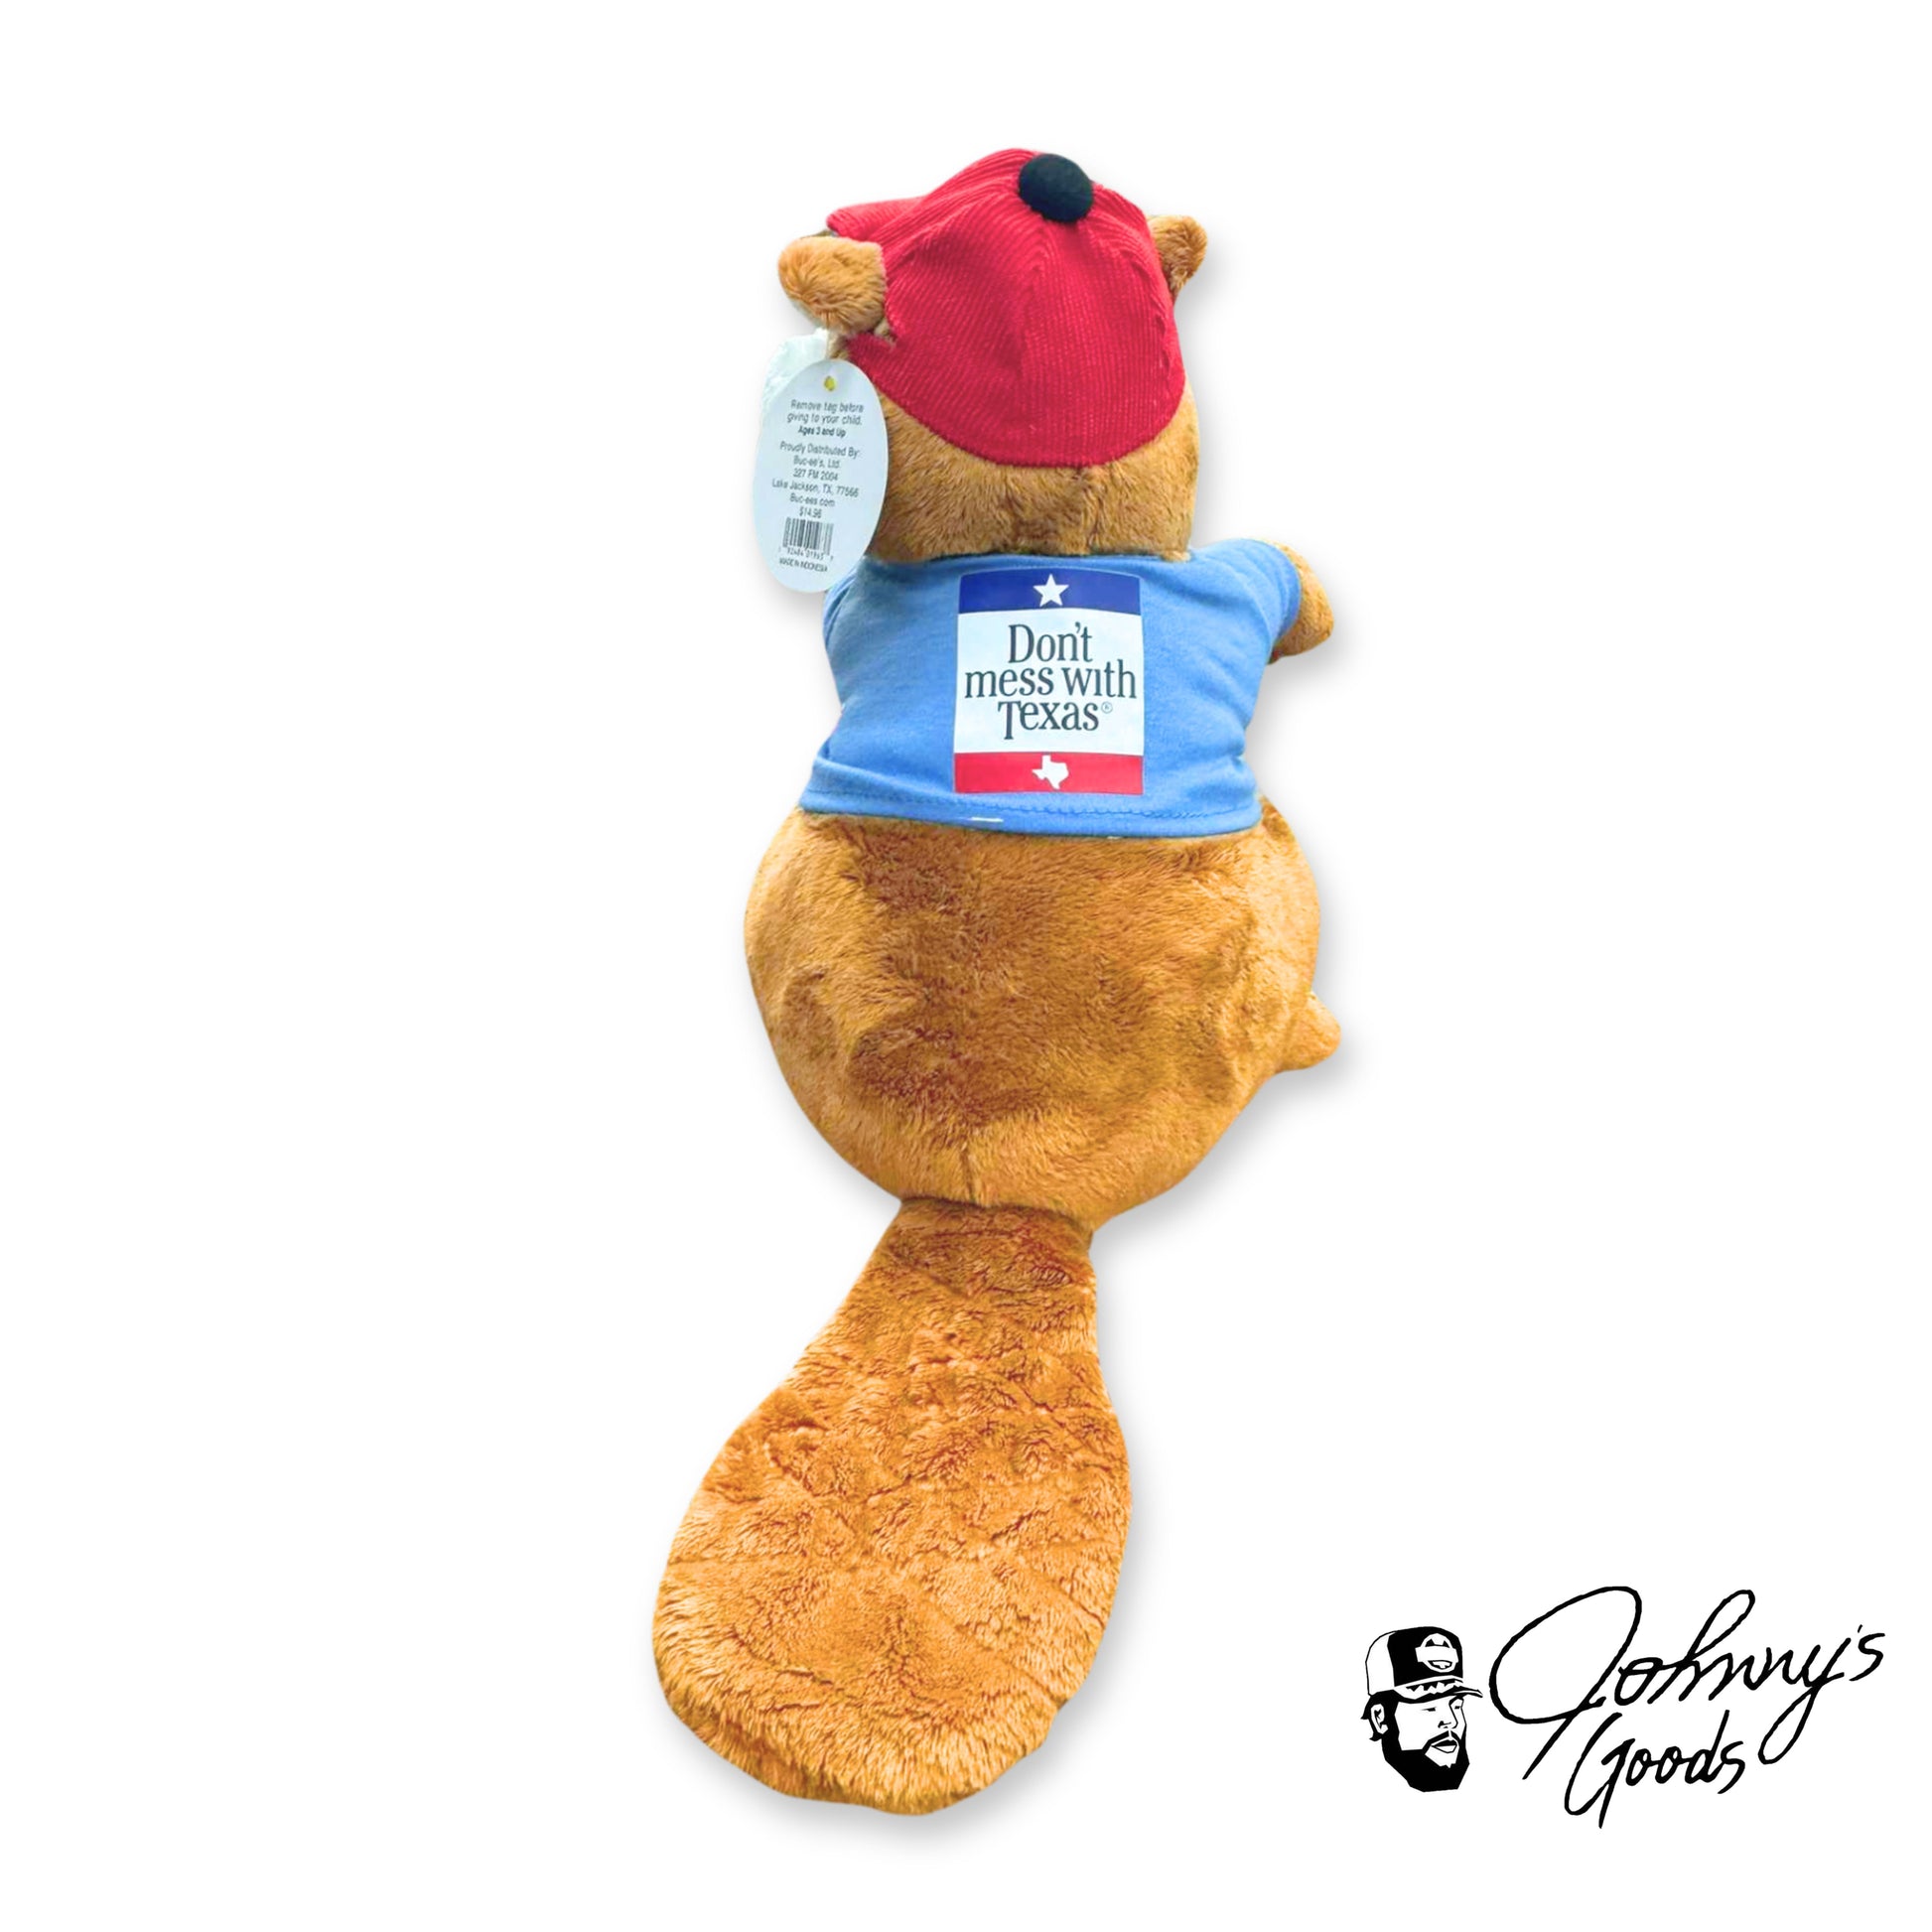 Buc-ee's Beaver Don't Mess with Texas Blue Shirt Stuffed Toy Plush buc ees buc ee's bucees buccees buc-ees